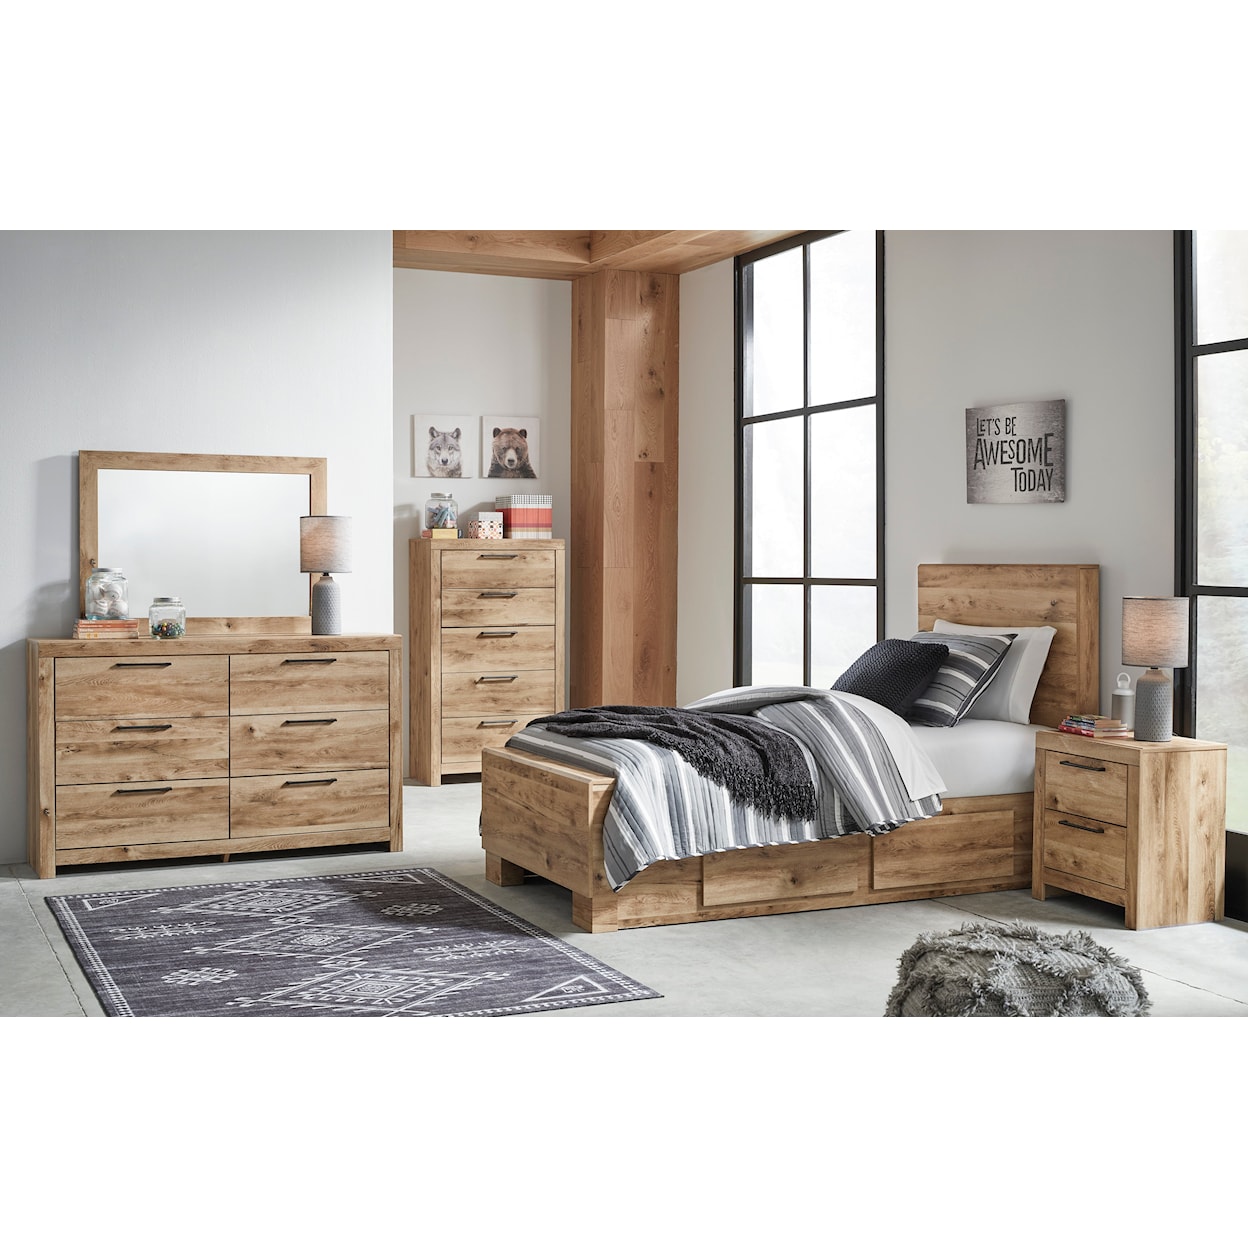 Signature Design by Ashley Hyanna Twin Bedroom Set